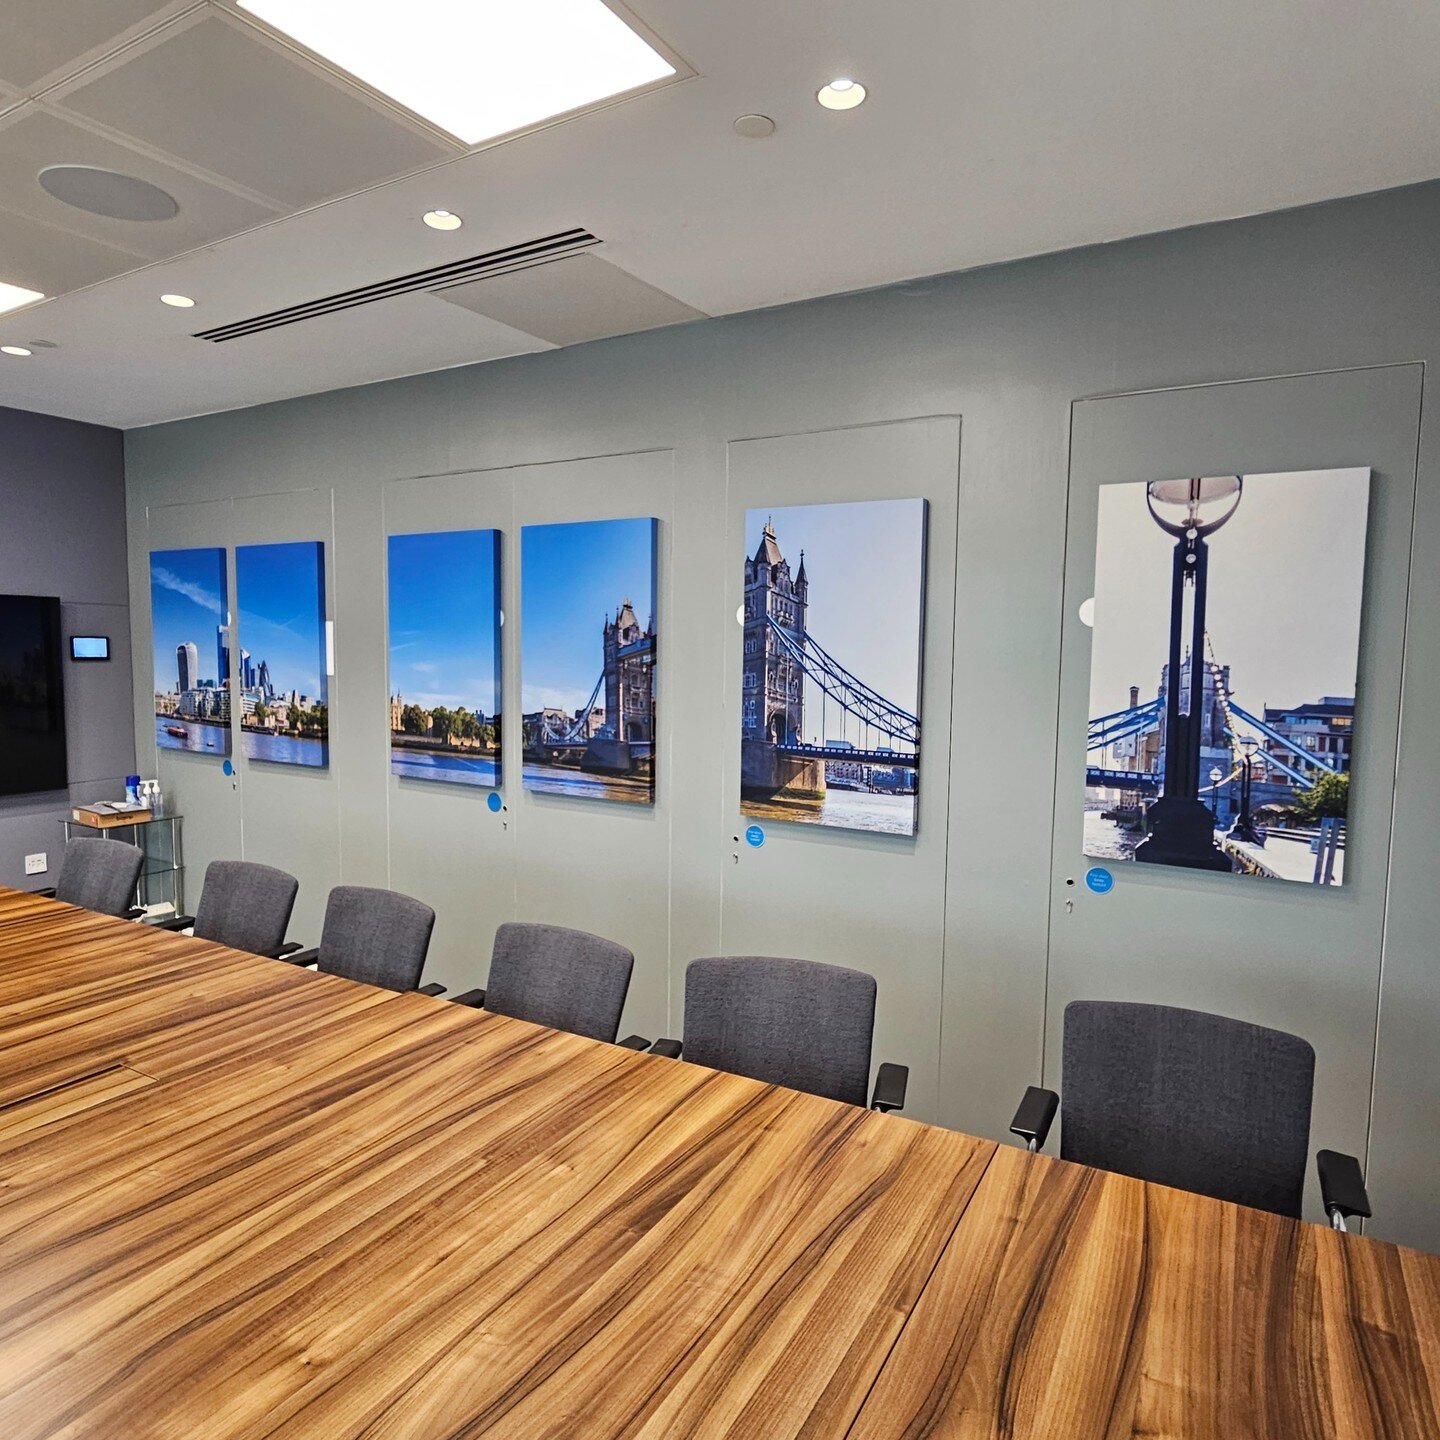 Our Acoustic Consultants talk about the mathematics and science behind Acoustics, and then they advise on products that can help control the noise in your workplace.

A recent customer, following a consultation, decided on Acoustic Art, which offers 